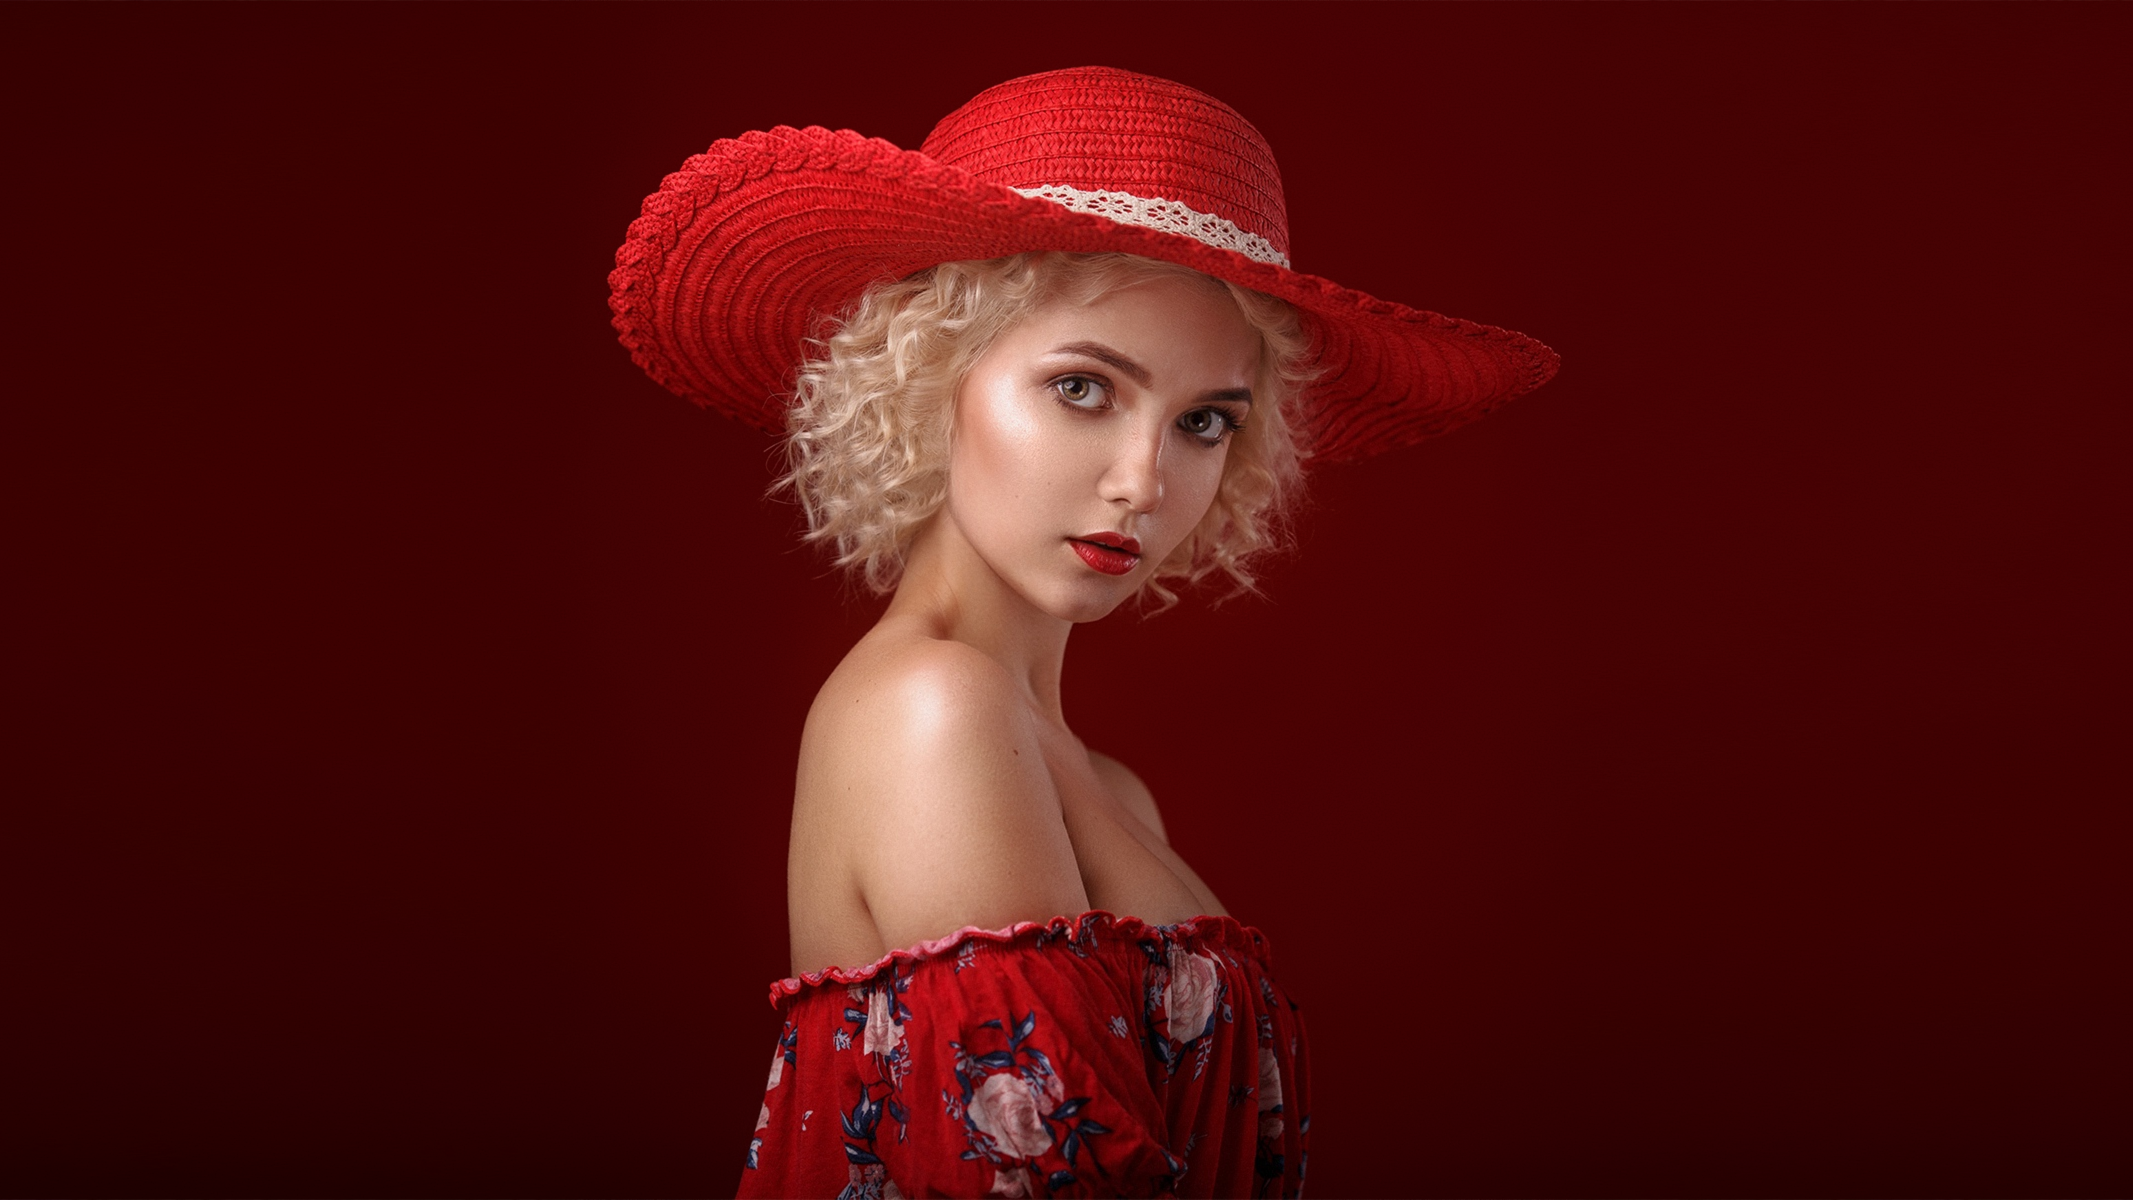 Women Model Blonde Curly Hair Looking At Viewer Red Lipstick Women With Hats Hat Bare Shoulders Crop 2133x1200